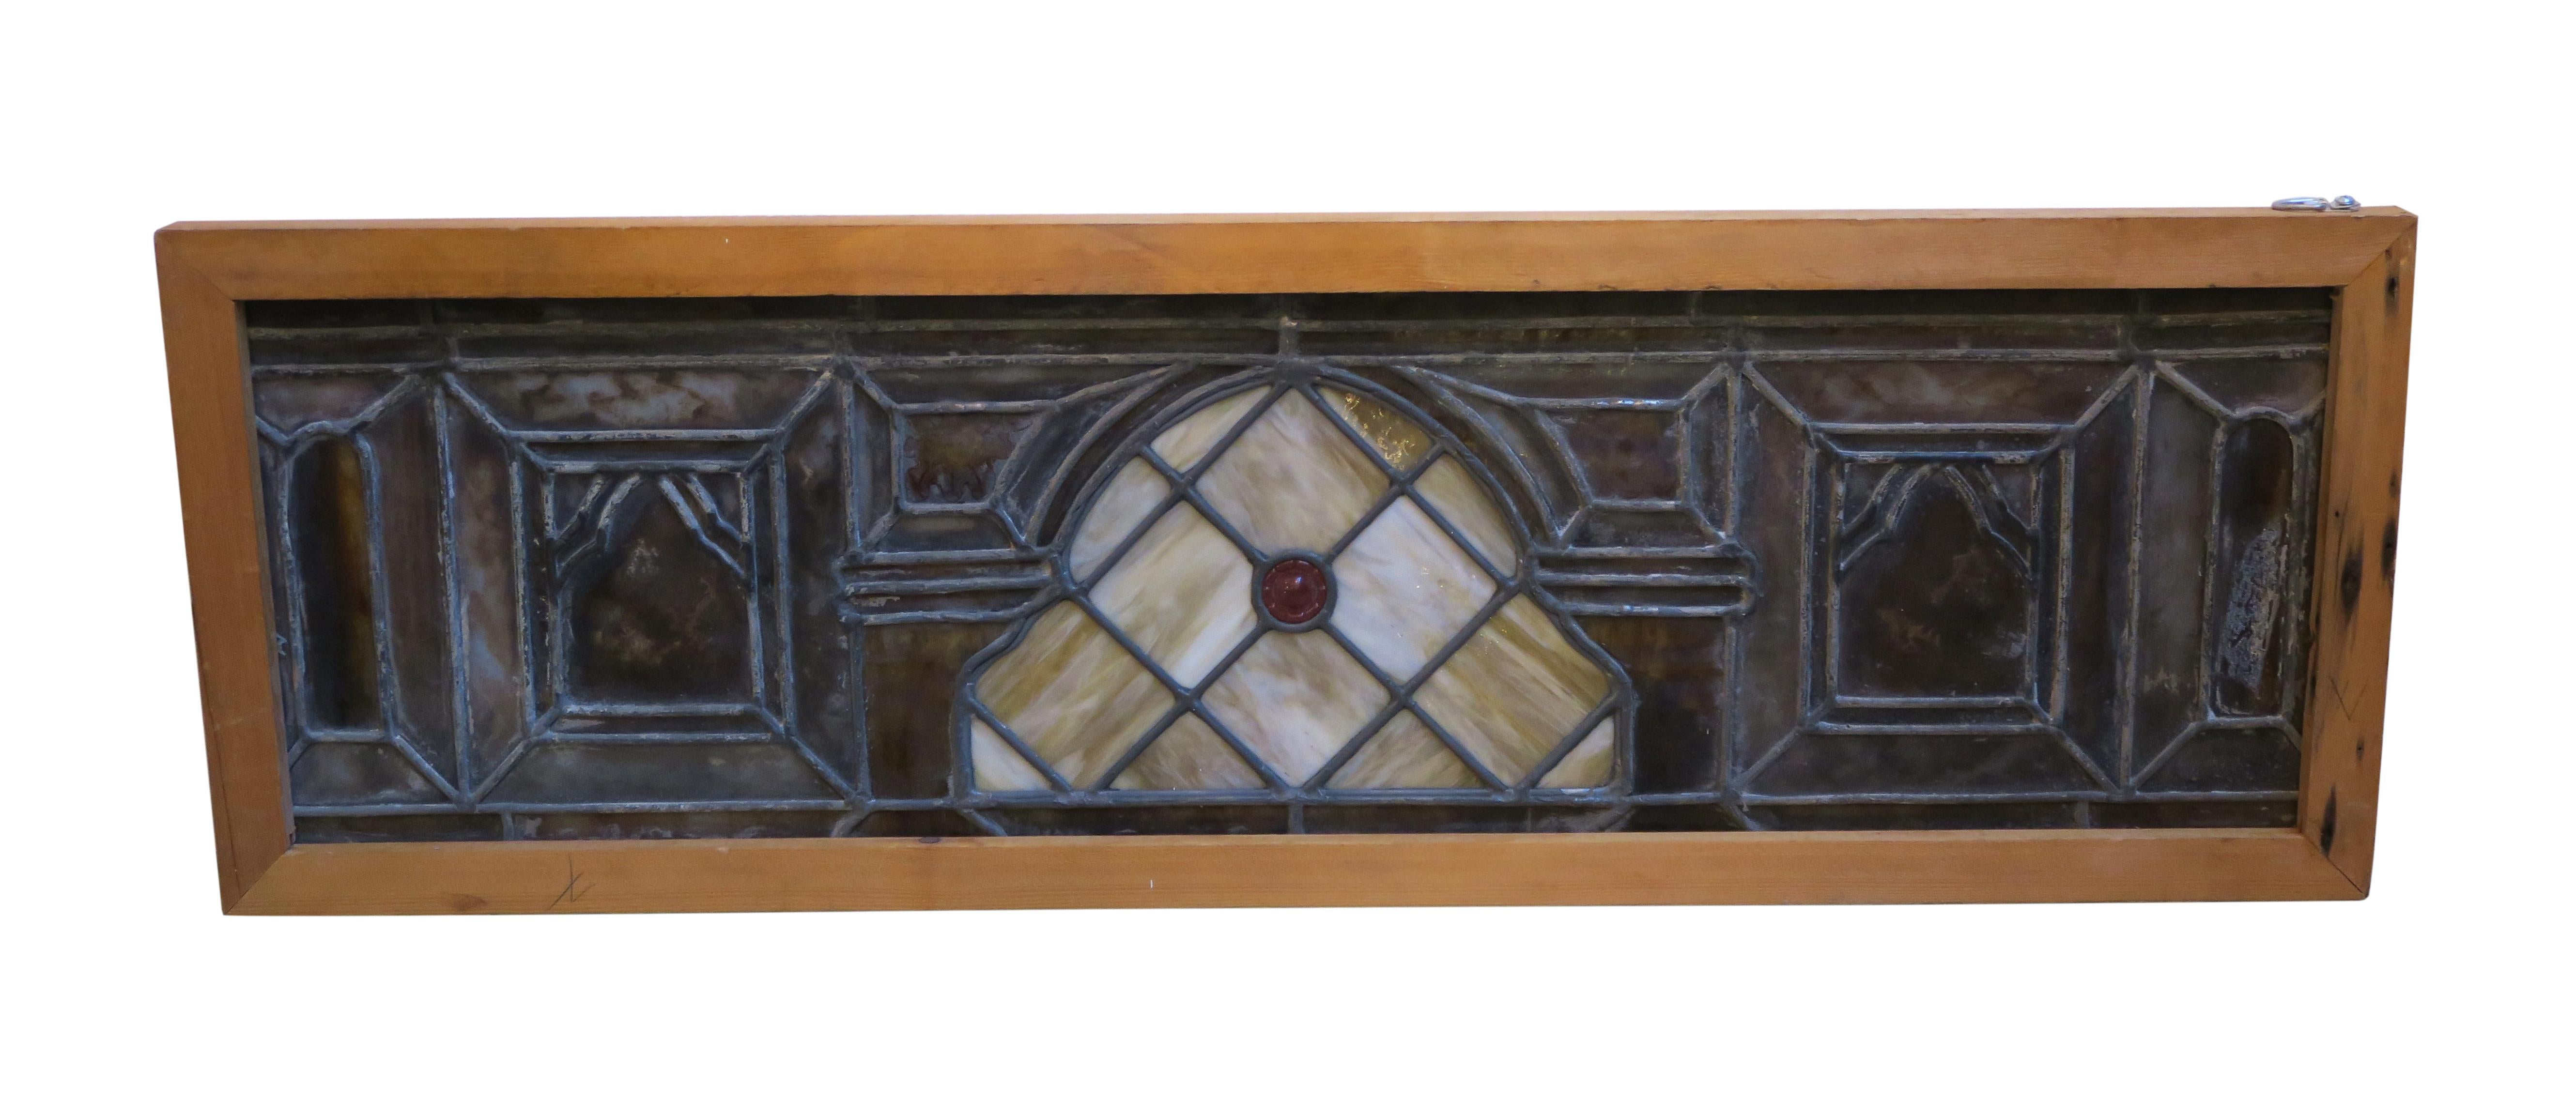 Early 20th Century 1900s Stained Glass Window with Red Jewel in New Wood Frame